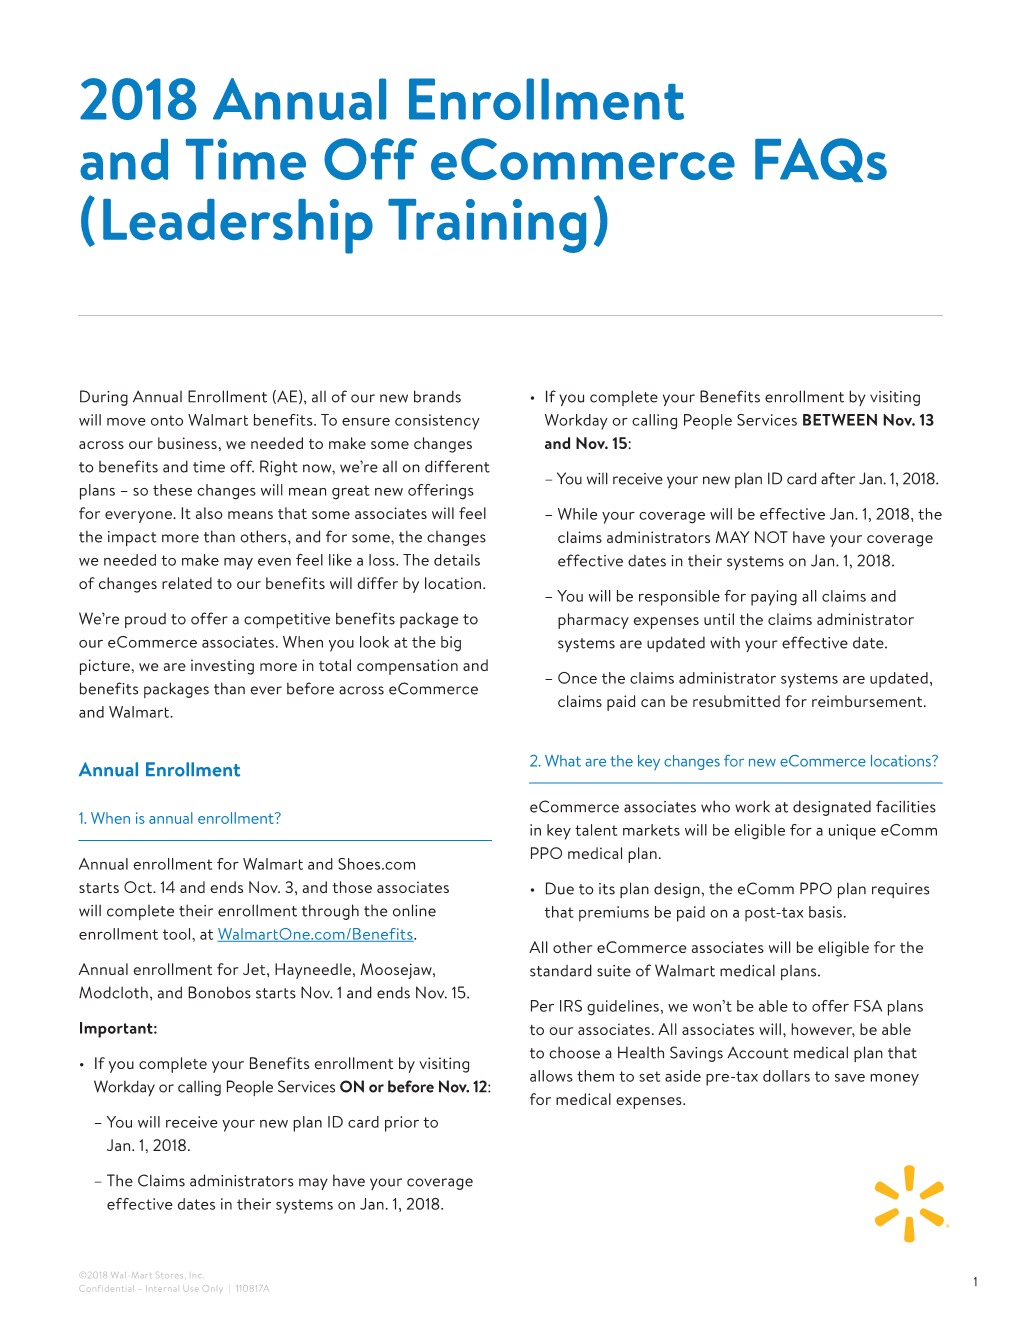 2018 Annual Enrollment and Time Off Ecommerce Faqs (Leadership Training)